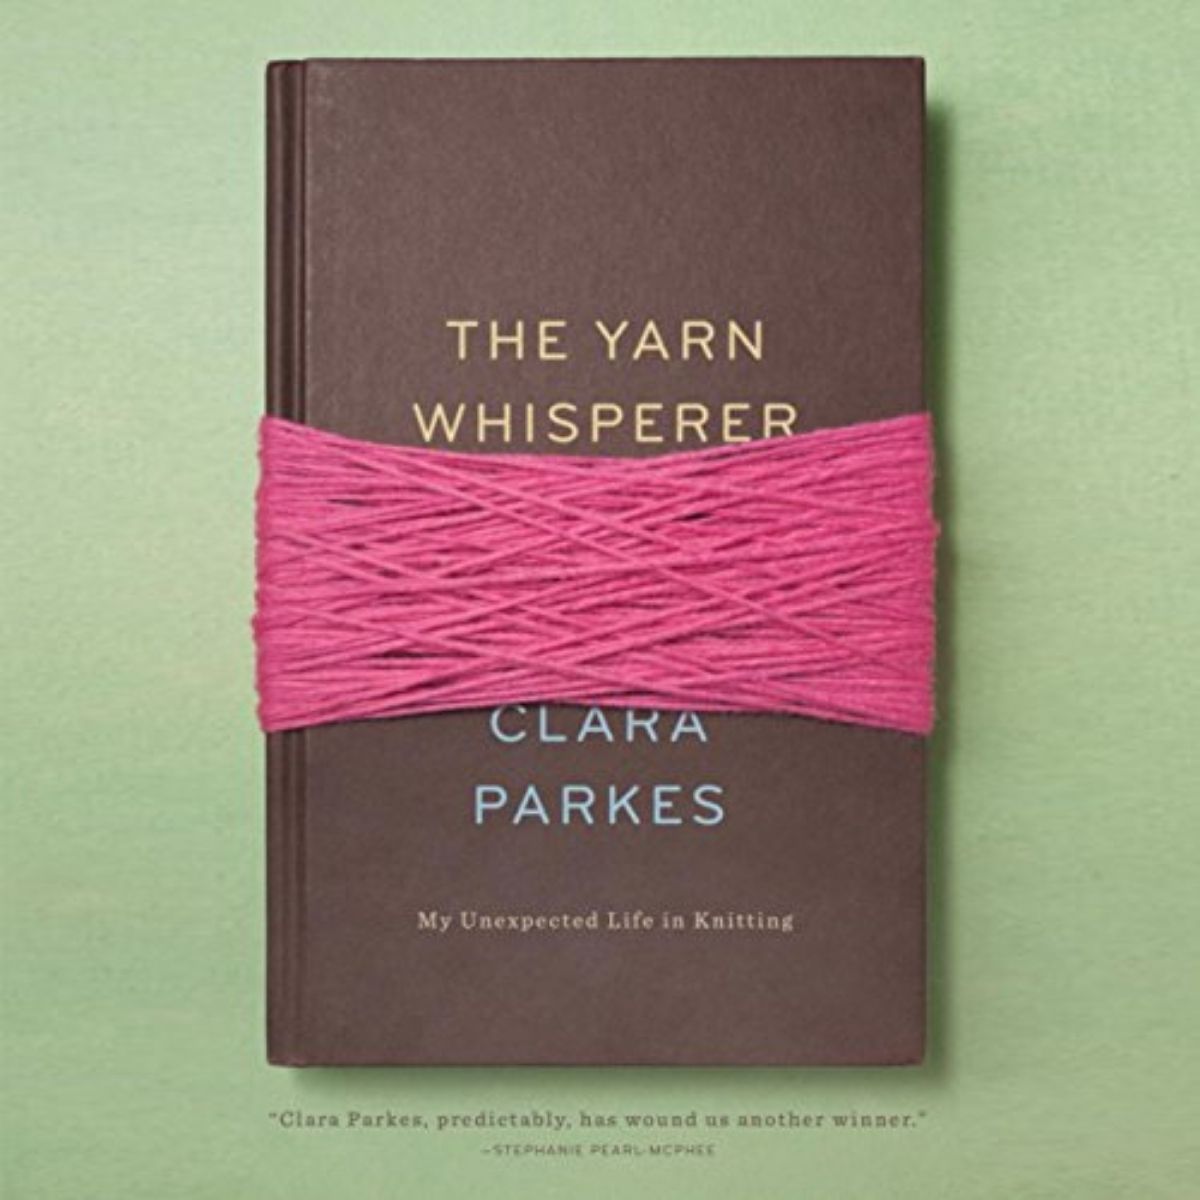 The yarn whisperer audiobook to listen to while crocheting or knitting.